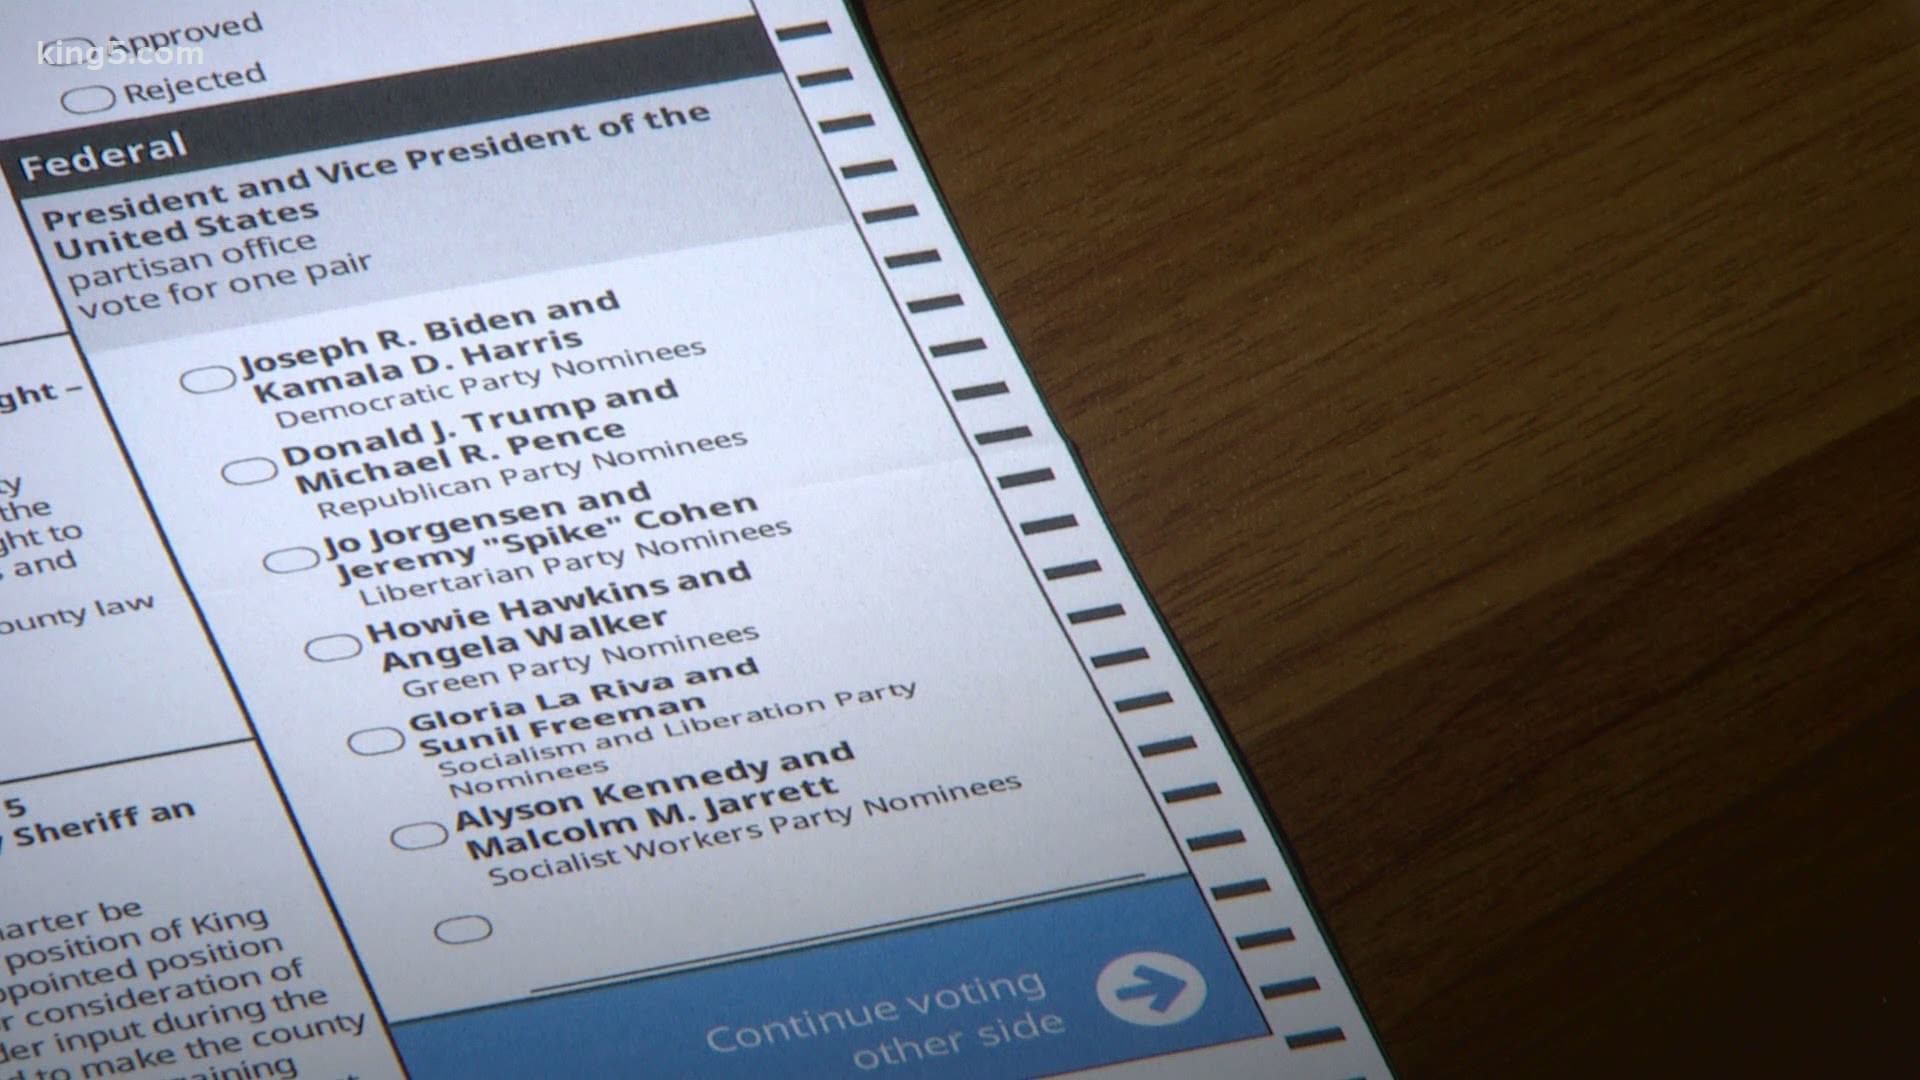 King County Elections says it's approaching 20% voter turnout which is well beyond record-breaking territory, but some voters are running into issues with ballots.